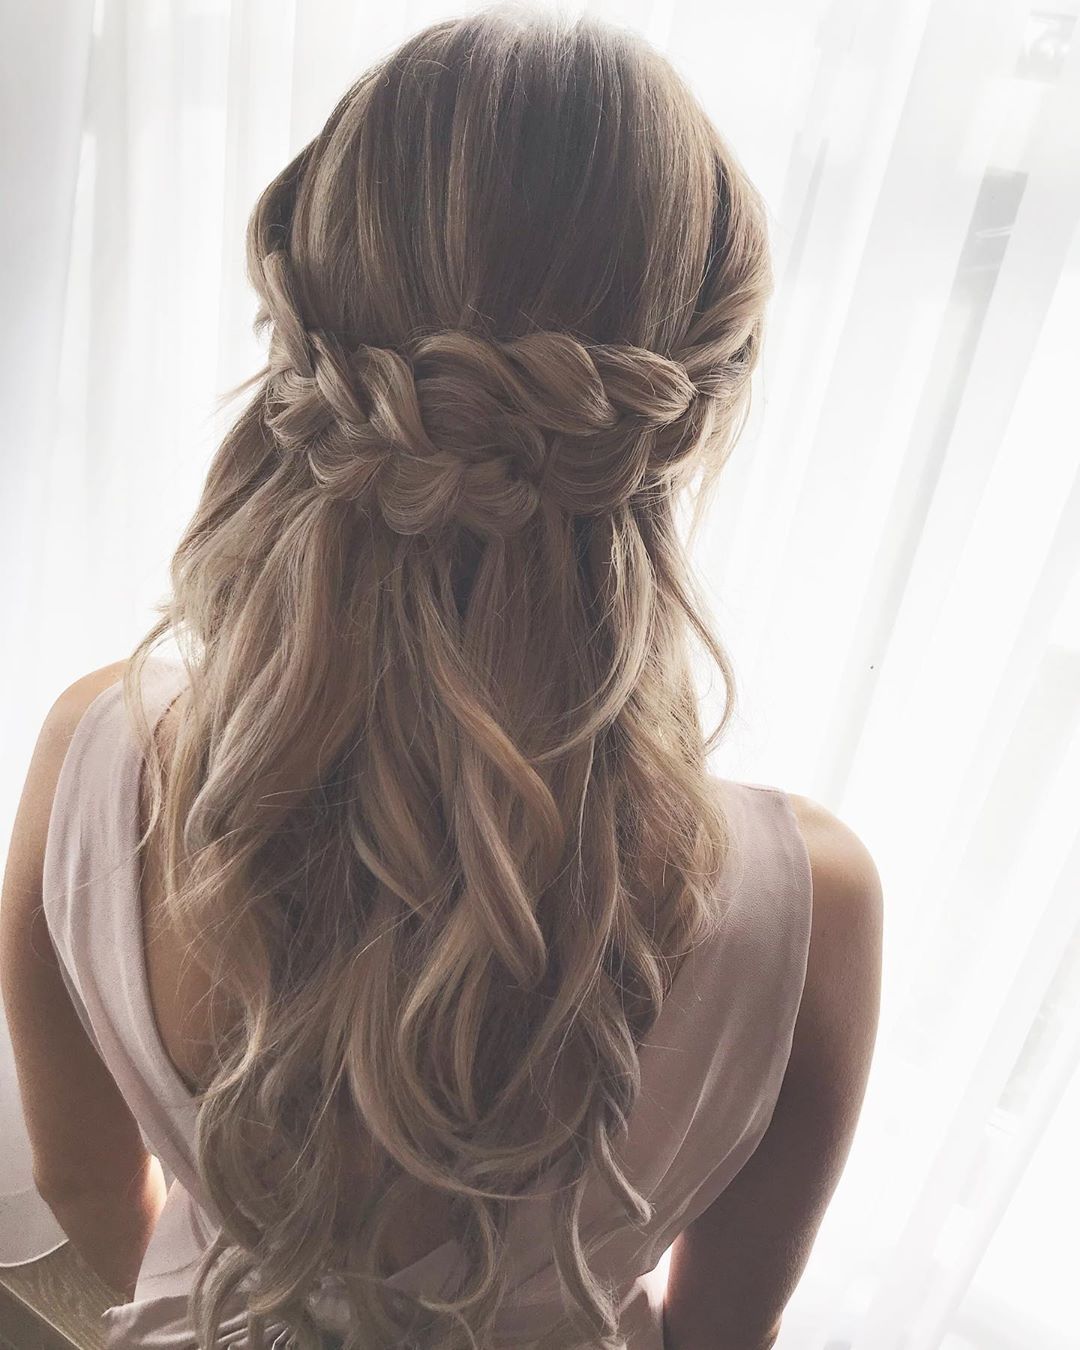 Most Recently Released Simplified Waterfall Braid Wedding Hairstyles Inside 50 Awesome Waterfall Braid You Can Do At Home – Short Pixie Cuts (View 20 of 20)